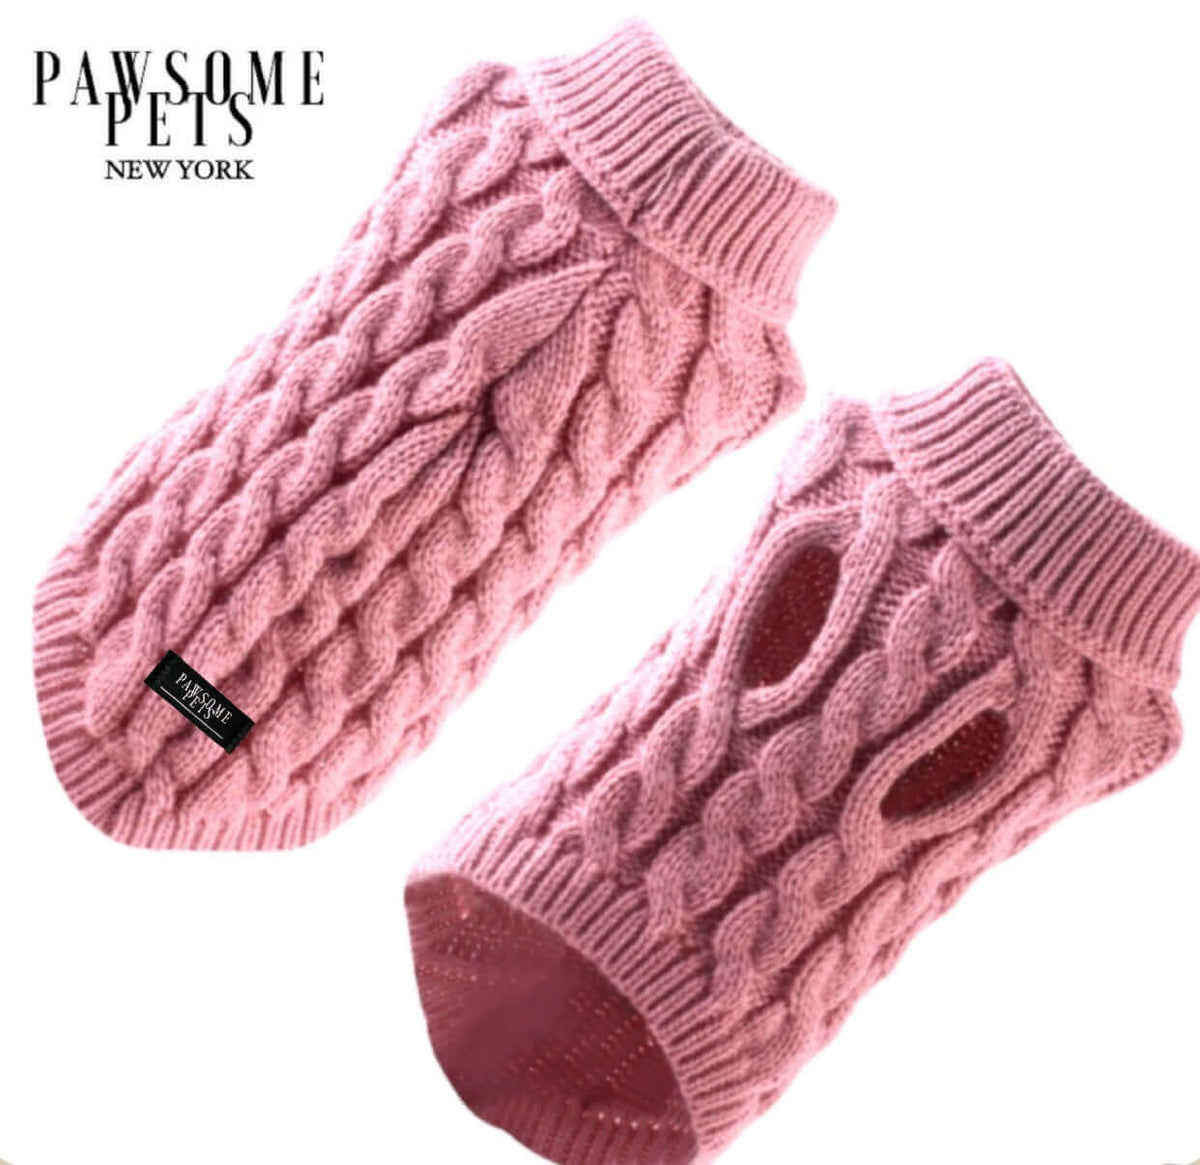 (EXTRA WARM) DOG AND CAT CABLE KNIT SWEATER - PINK